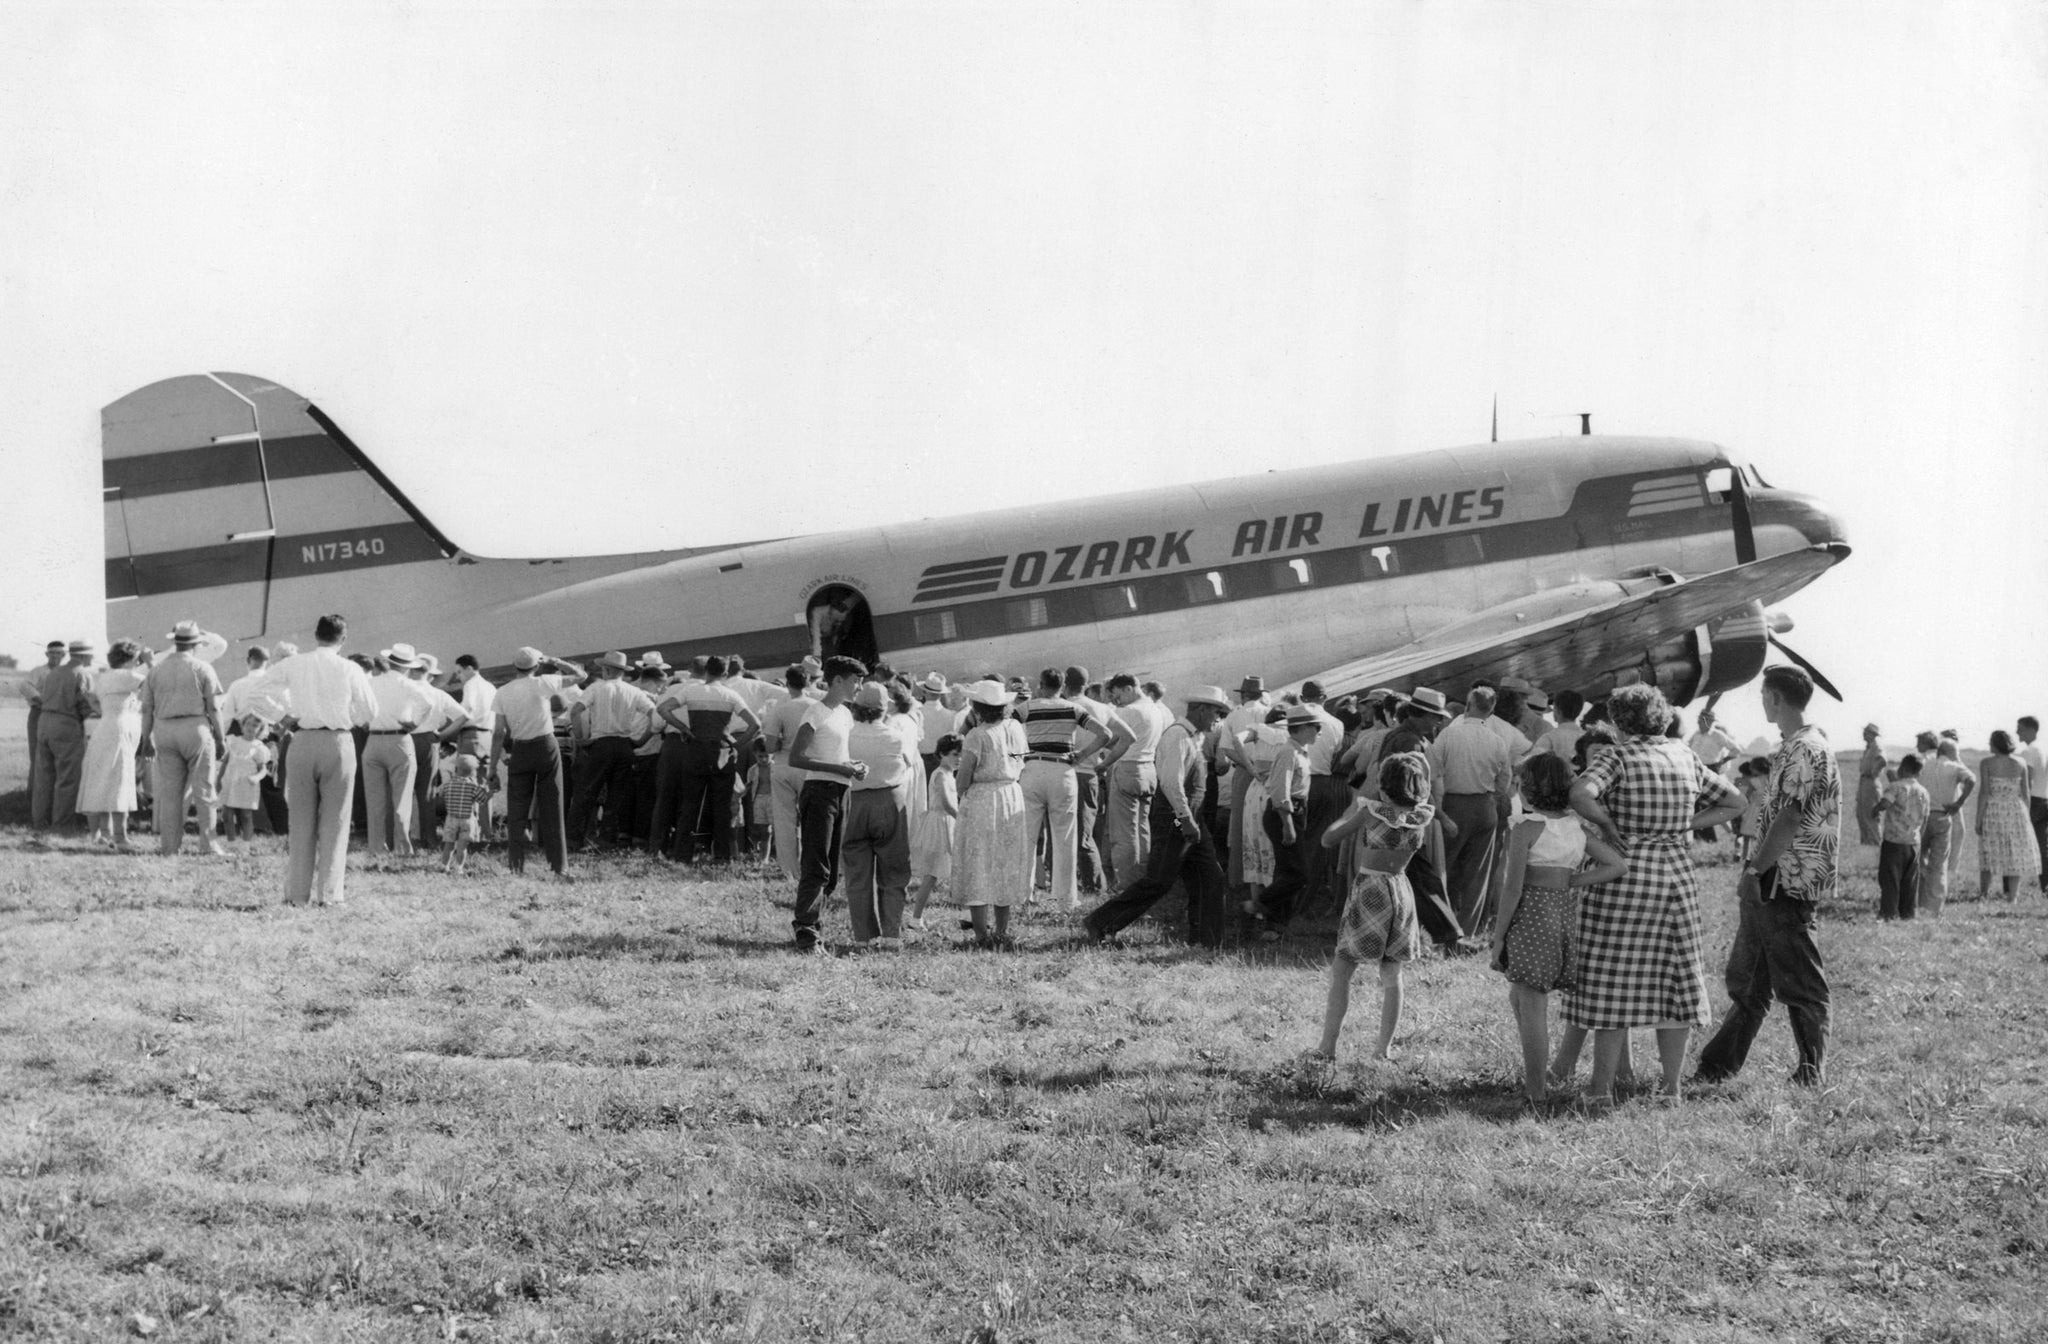 An Ozark DC-3 being inspected by curious citizens on Air Carrier Get Acquainted Day at Municipal Airport, 1951. It was a day where the plane was open to public viewing, and a few lucky citizens took a ride around Bloomington. -- Courtesy of the McLean County Museum of History, Pantagraph Collection 